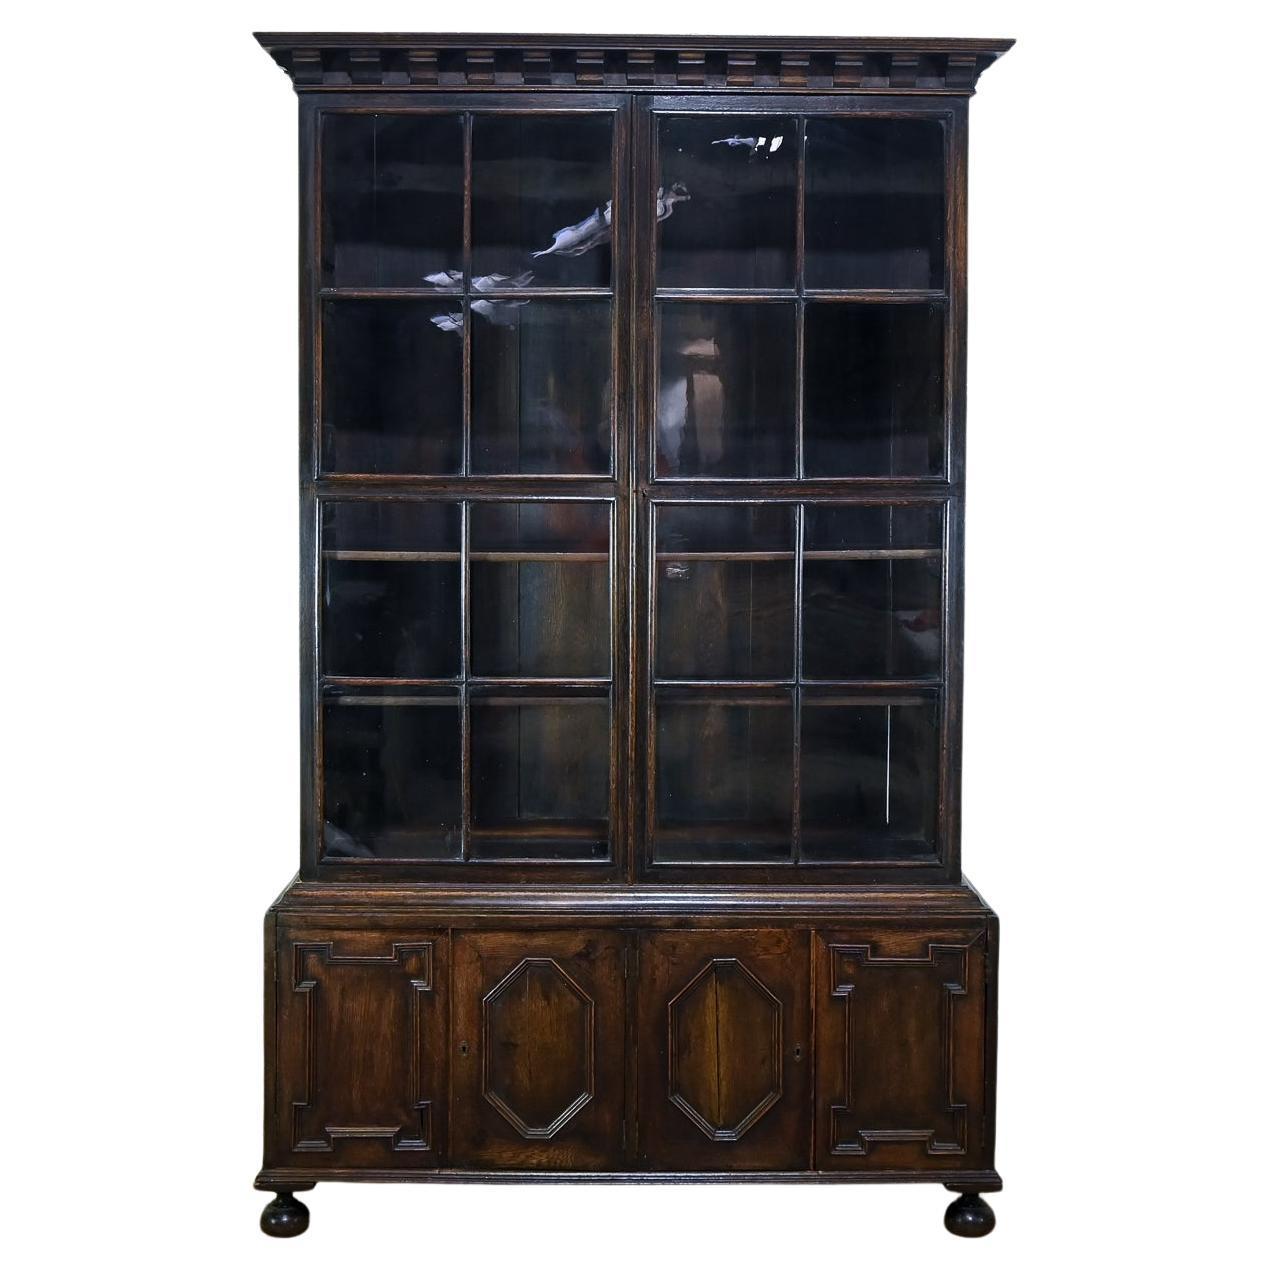 An Early 20th Century Glazed Oak Bookcase - In The Manner Of Samuel Pepys c.1910 For Sale